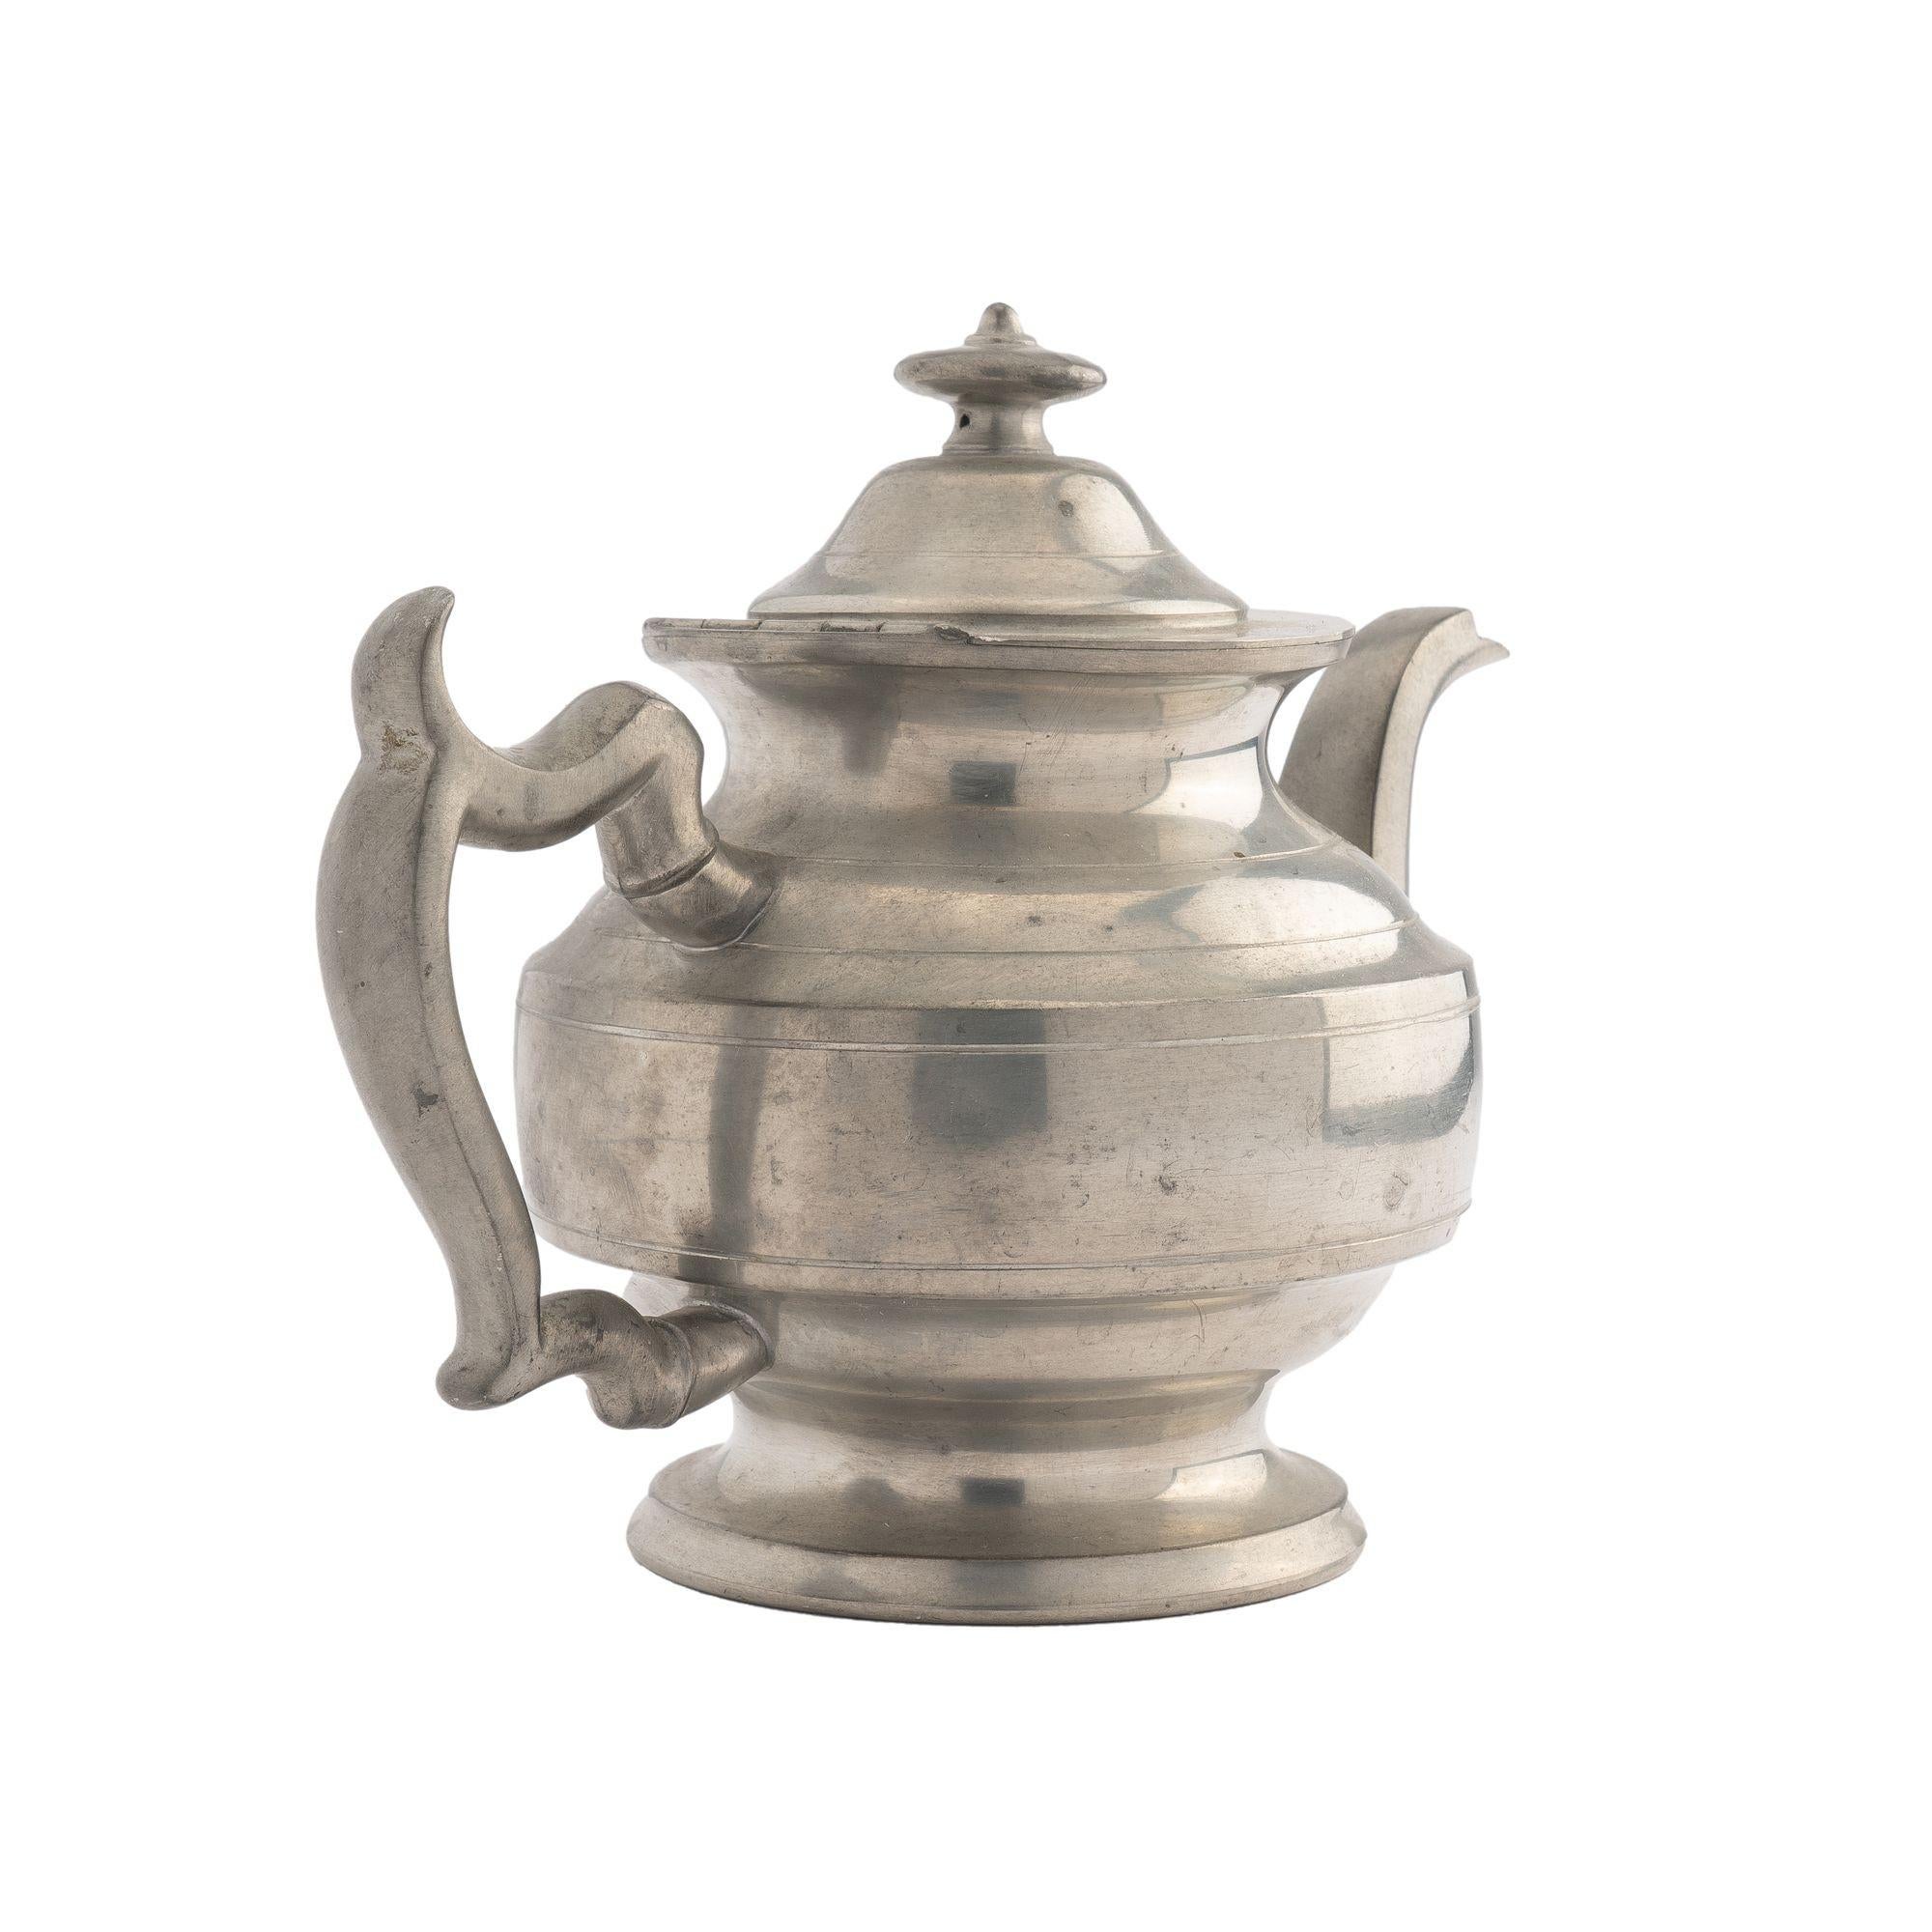 Woodbury Pewter Academic Revival Pewter Holloware Teapot, 1952 For Sale 1